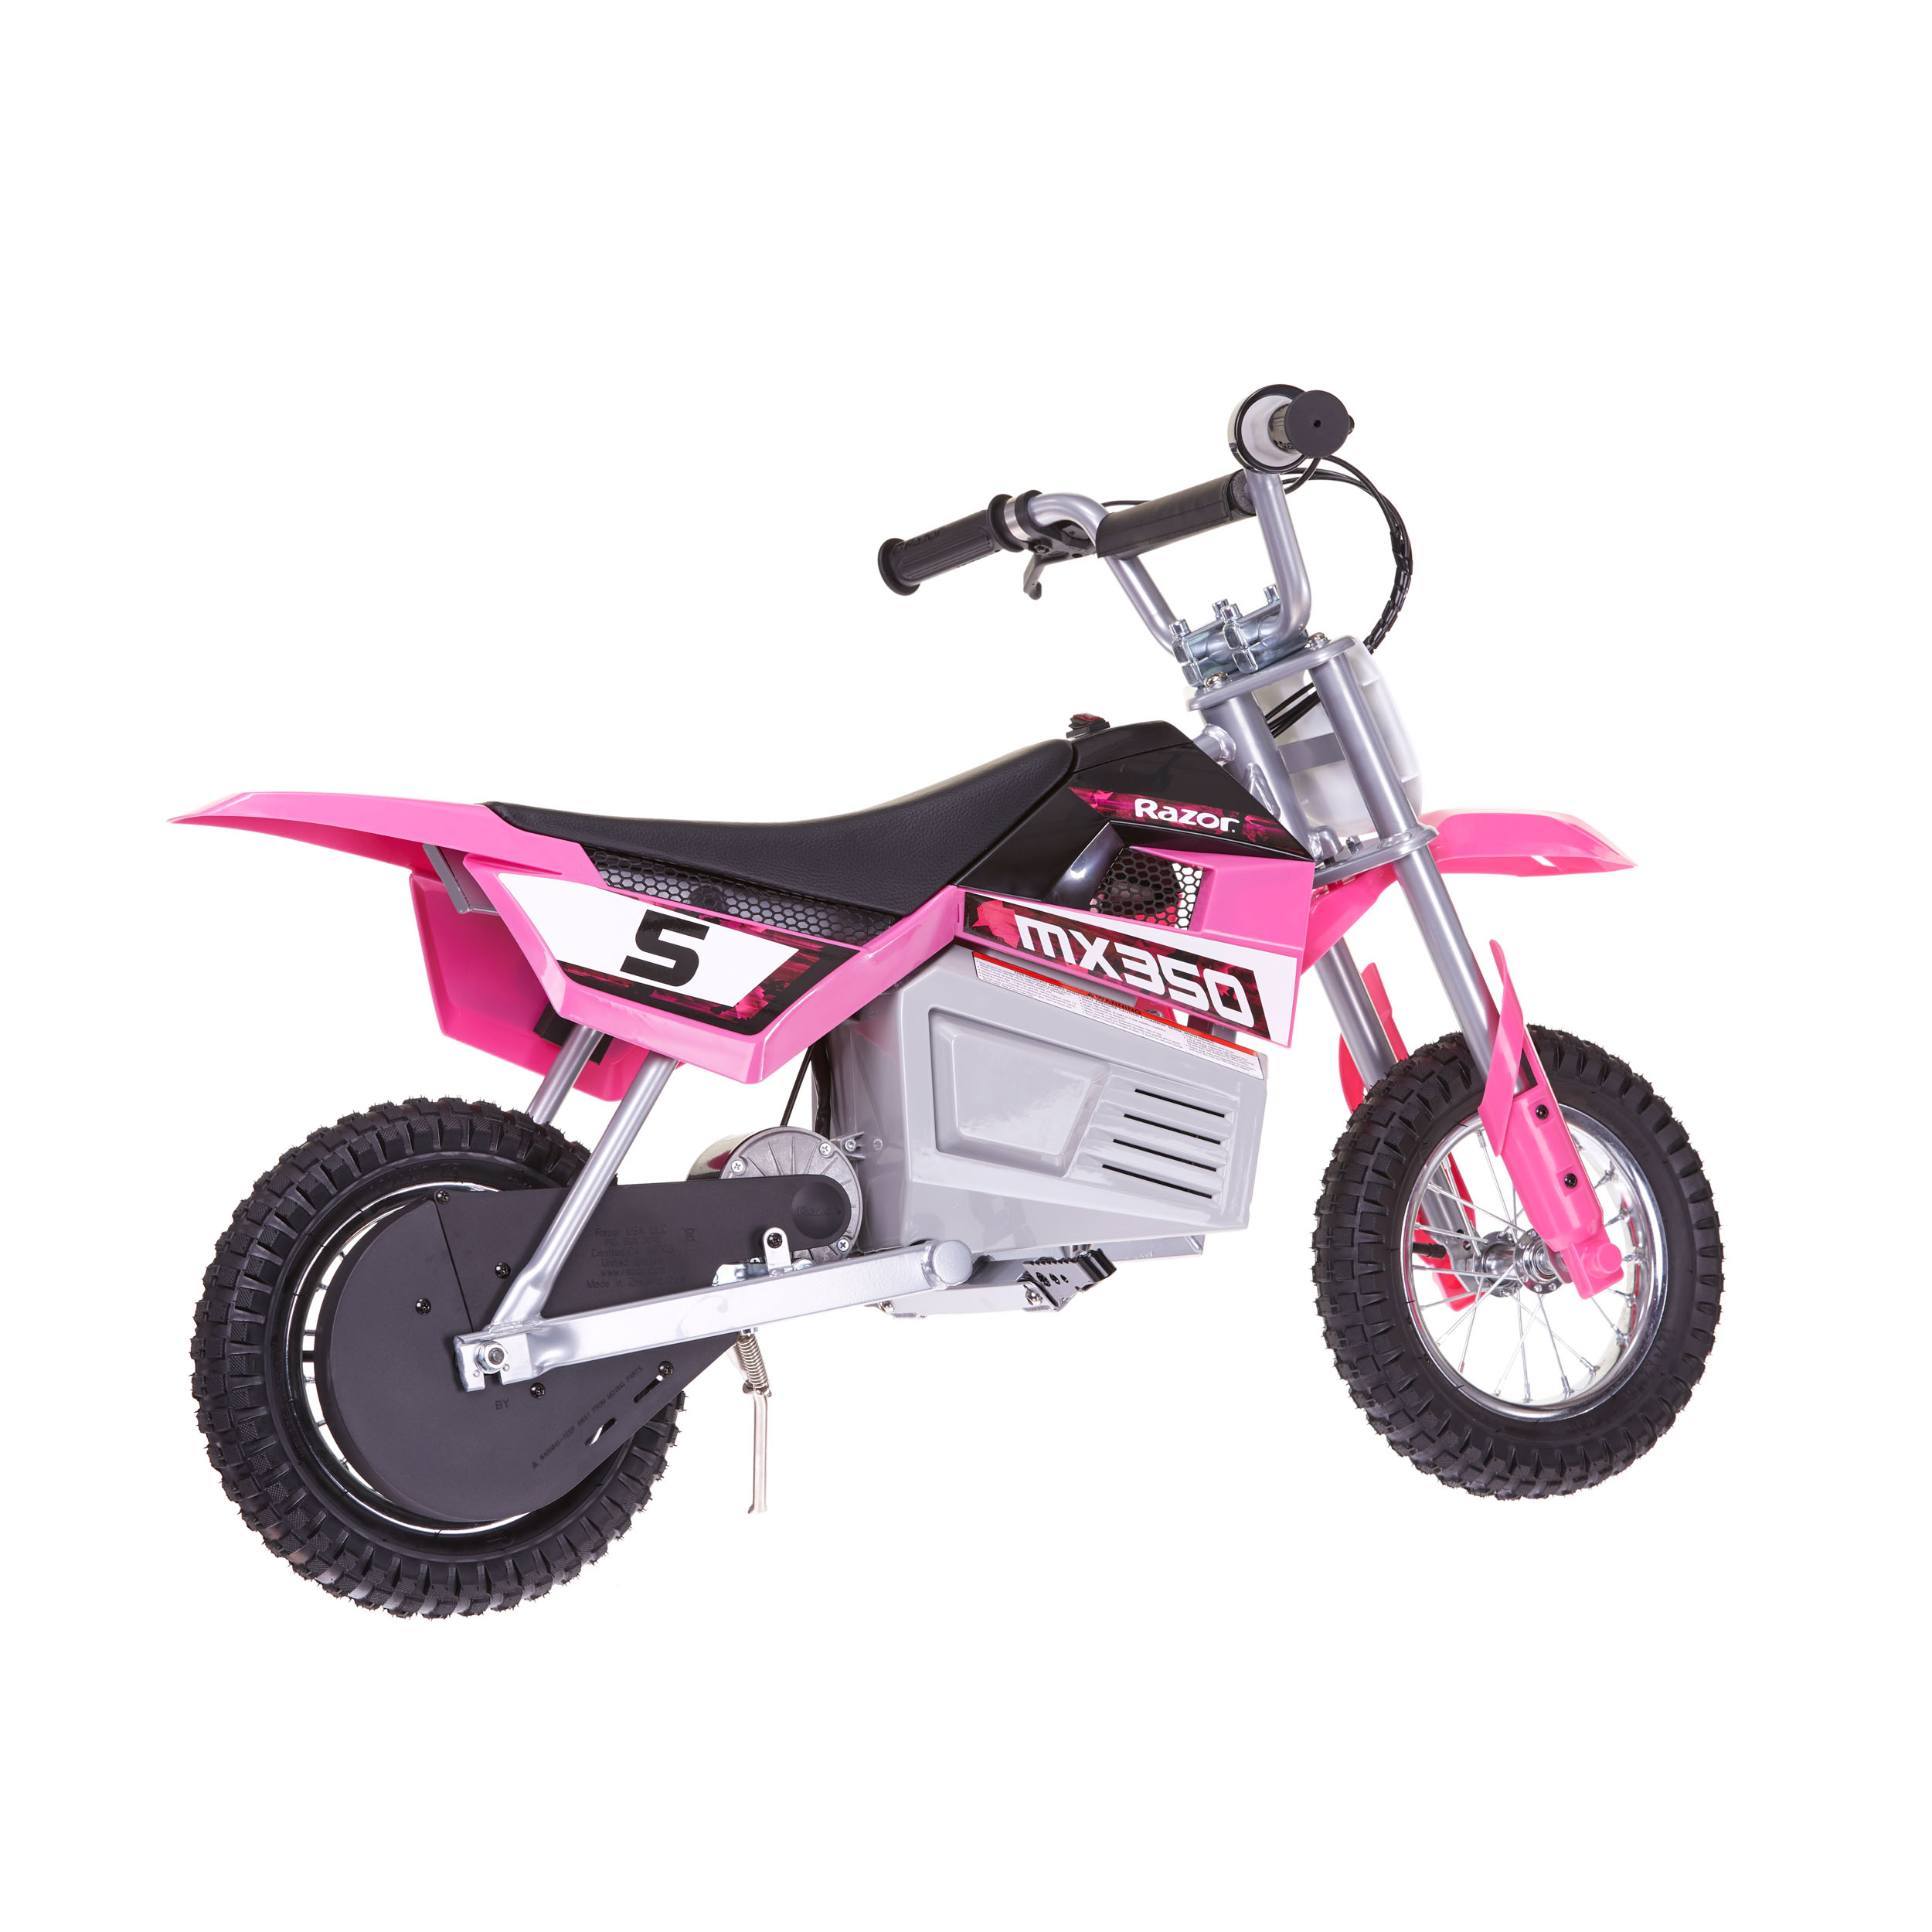 Razor Dirt Rocket MX350 - Black with Decals Included, 24V Electric-Powered  Dirt Bike for Kids 13+ 